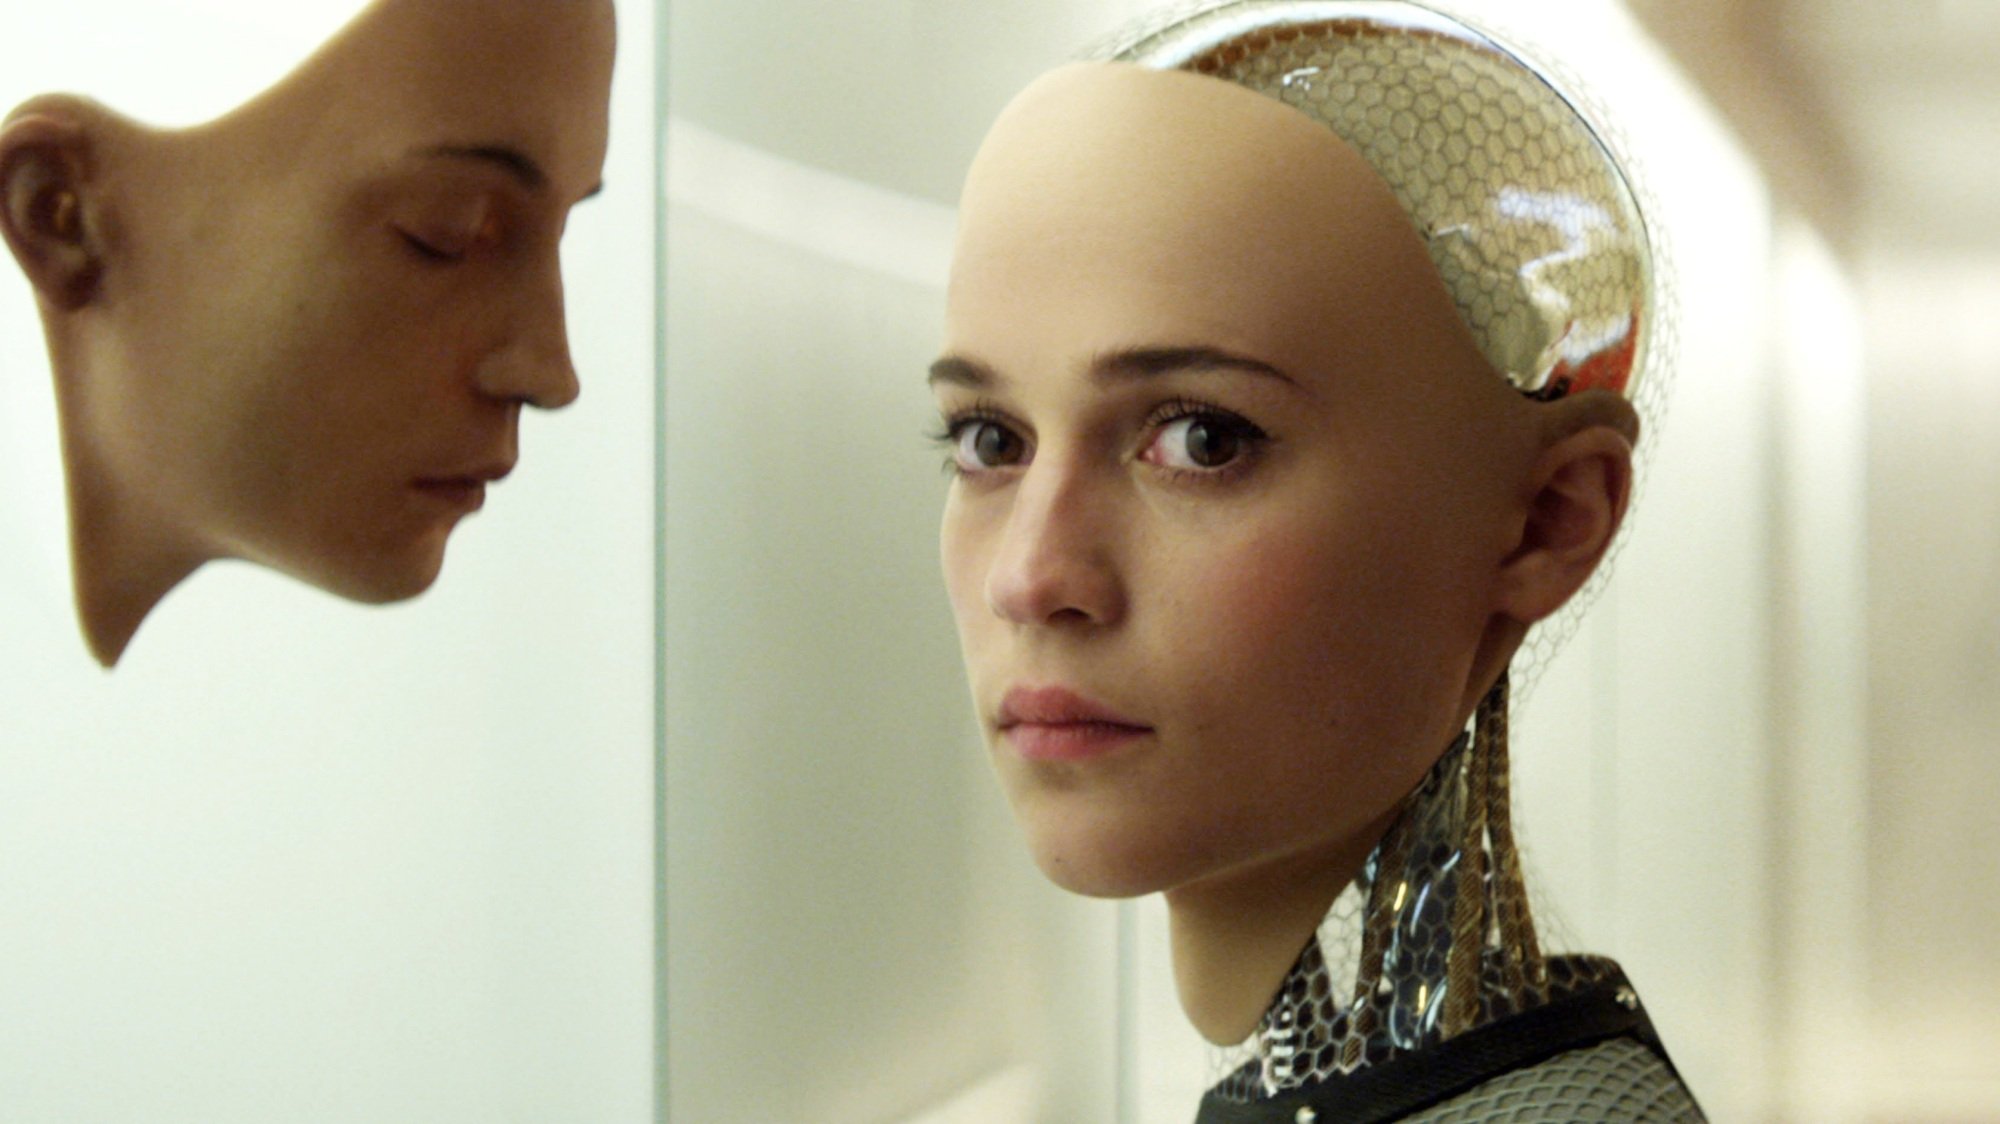 A humanoid robot woman looks at a human face mask.